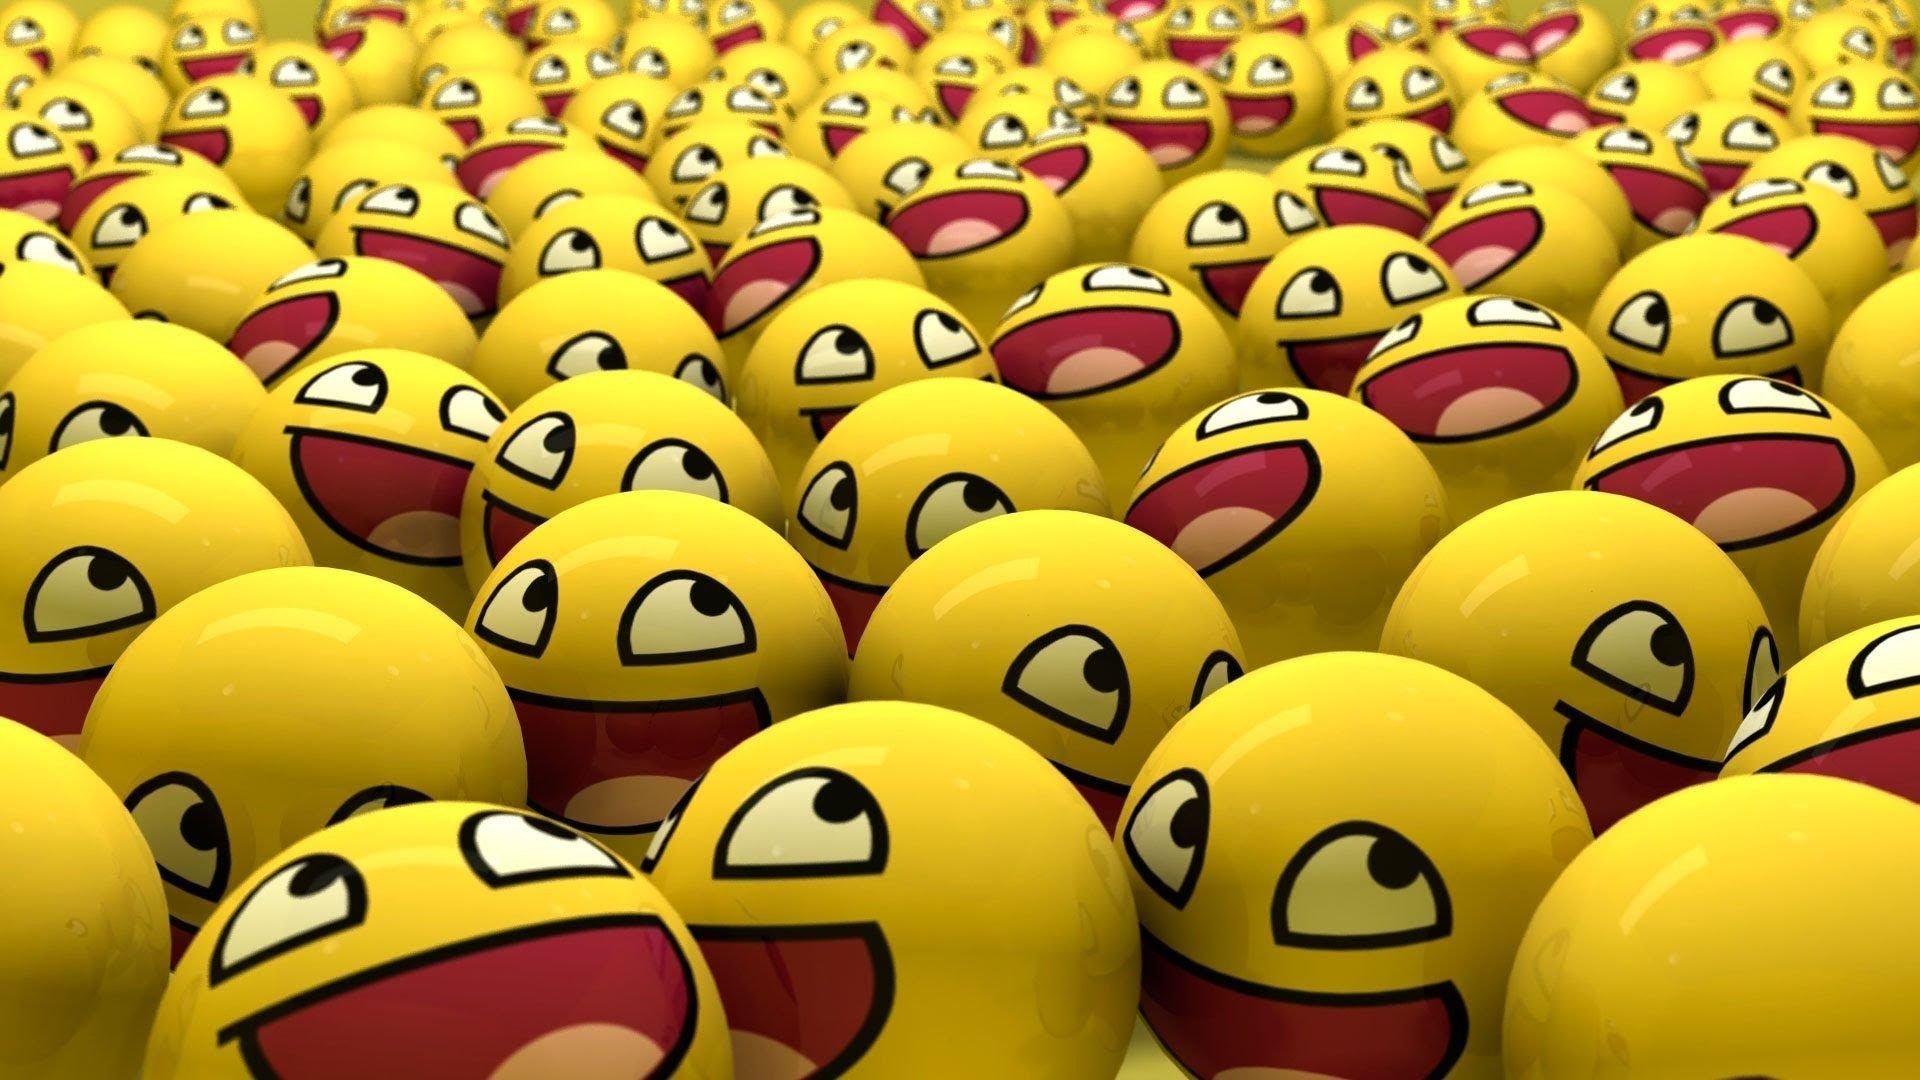 Wallpaper of Funny Faces